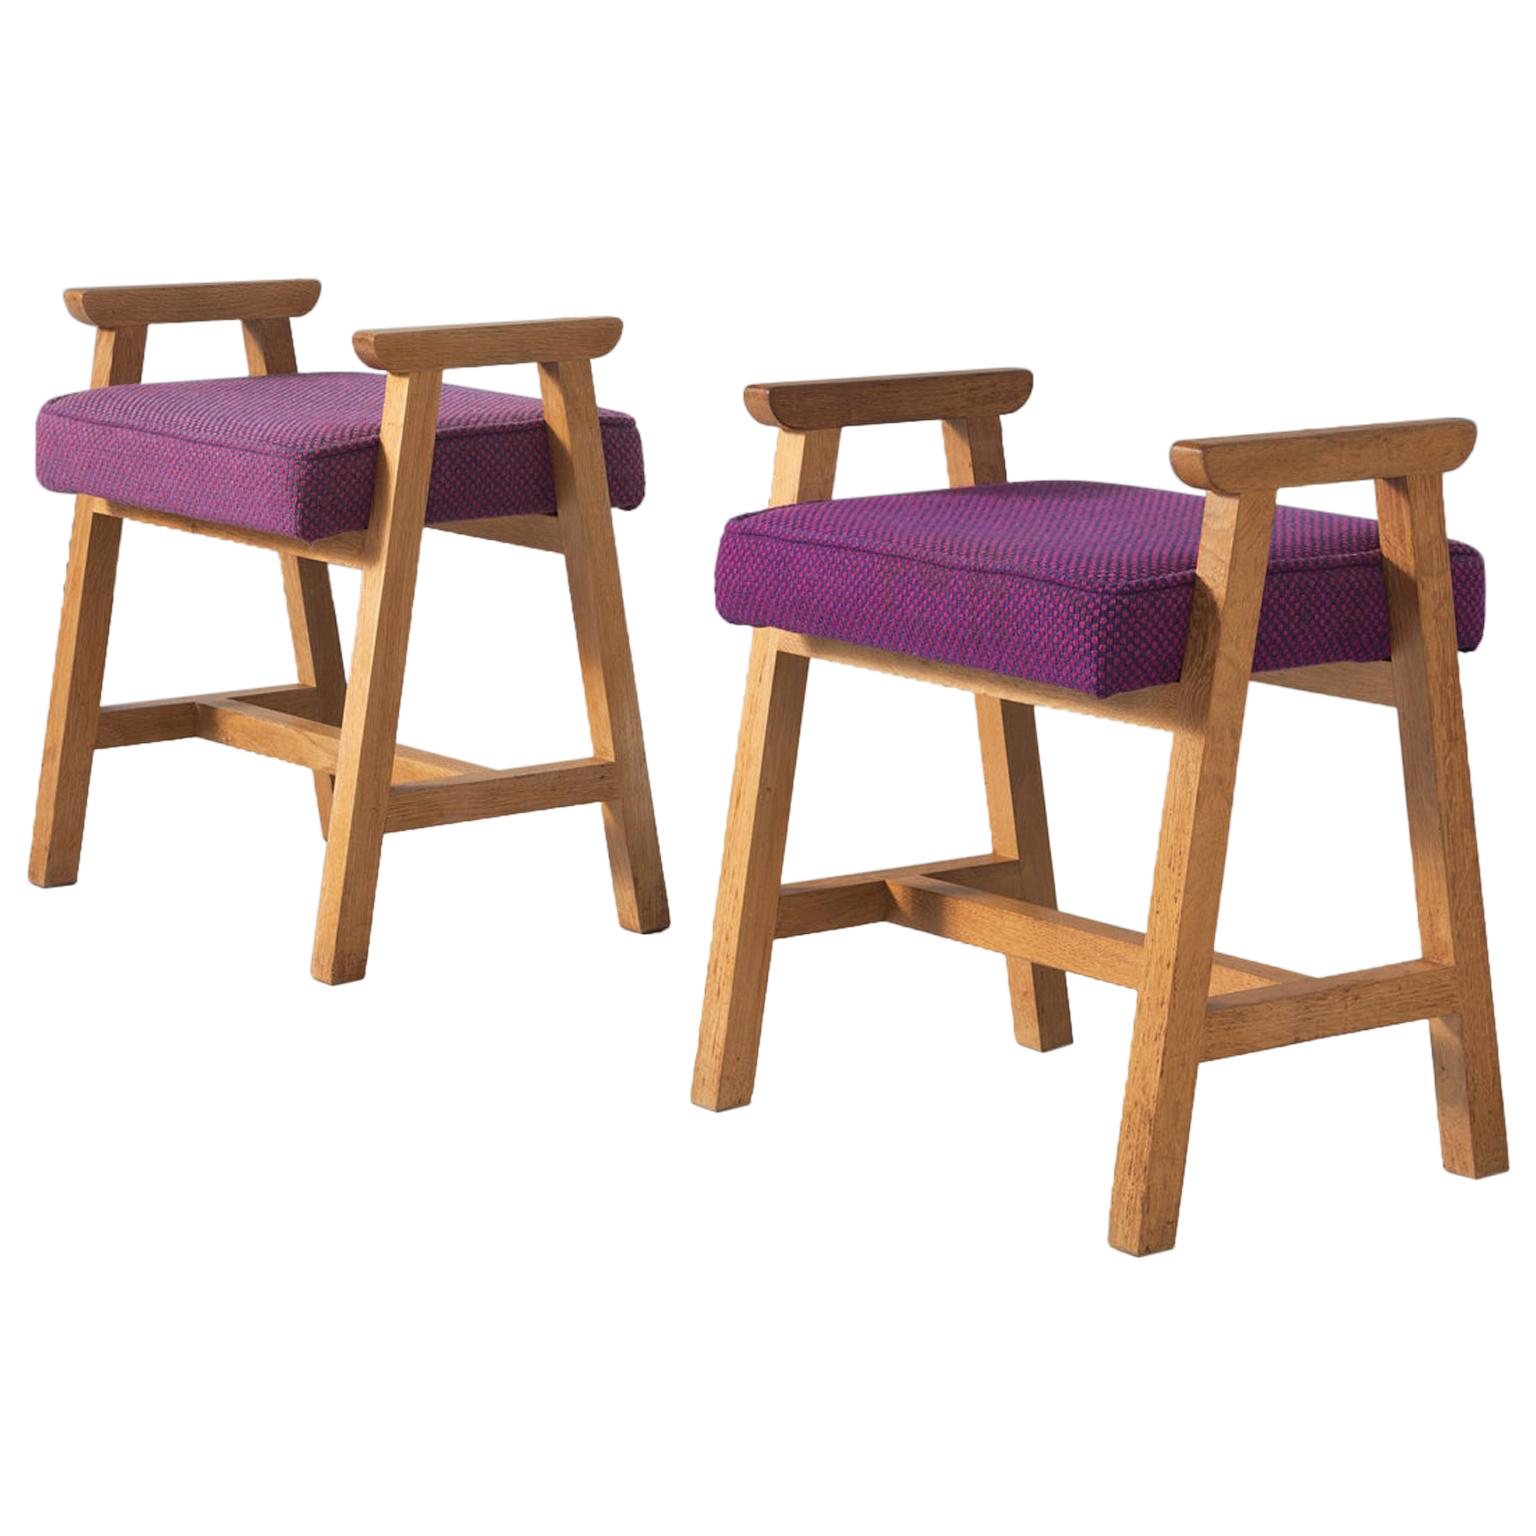 Guillerme and Chambron Set of Two Oak and Fabric Stools